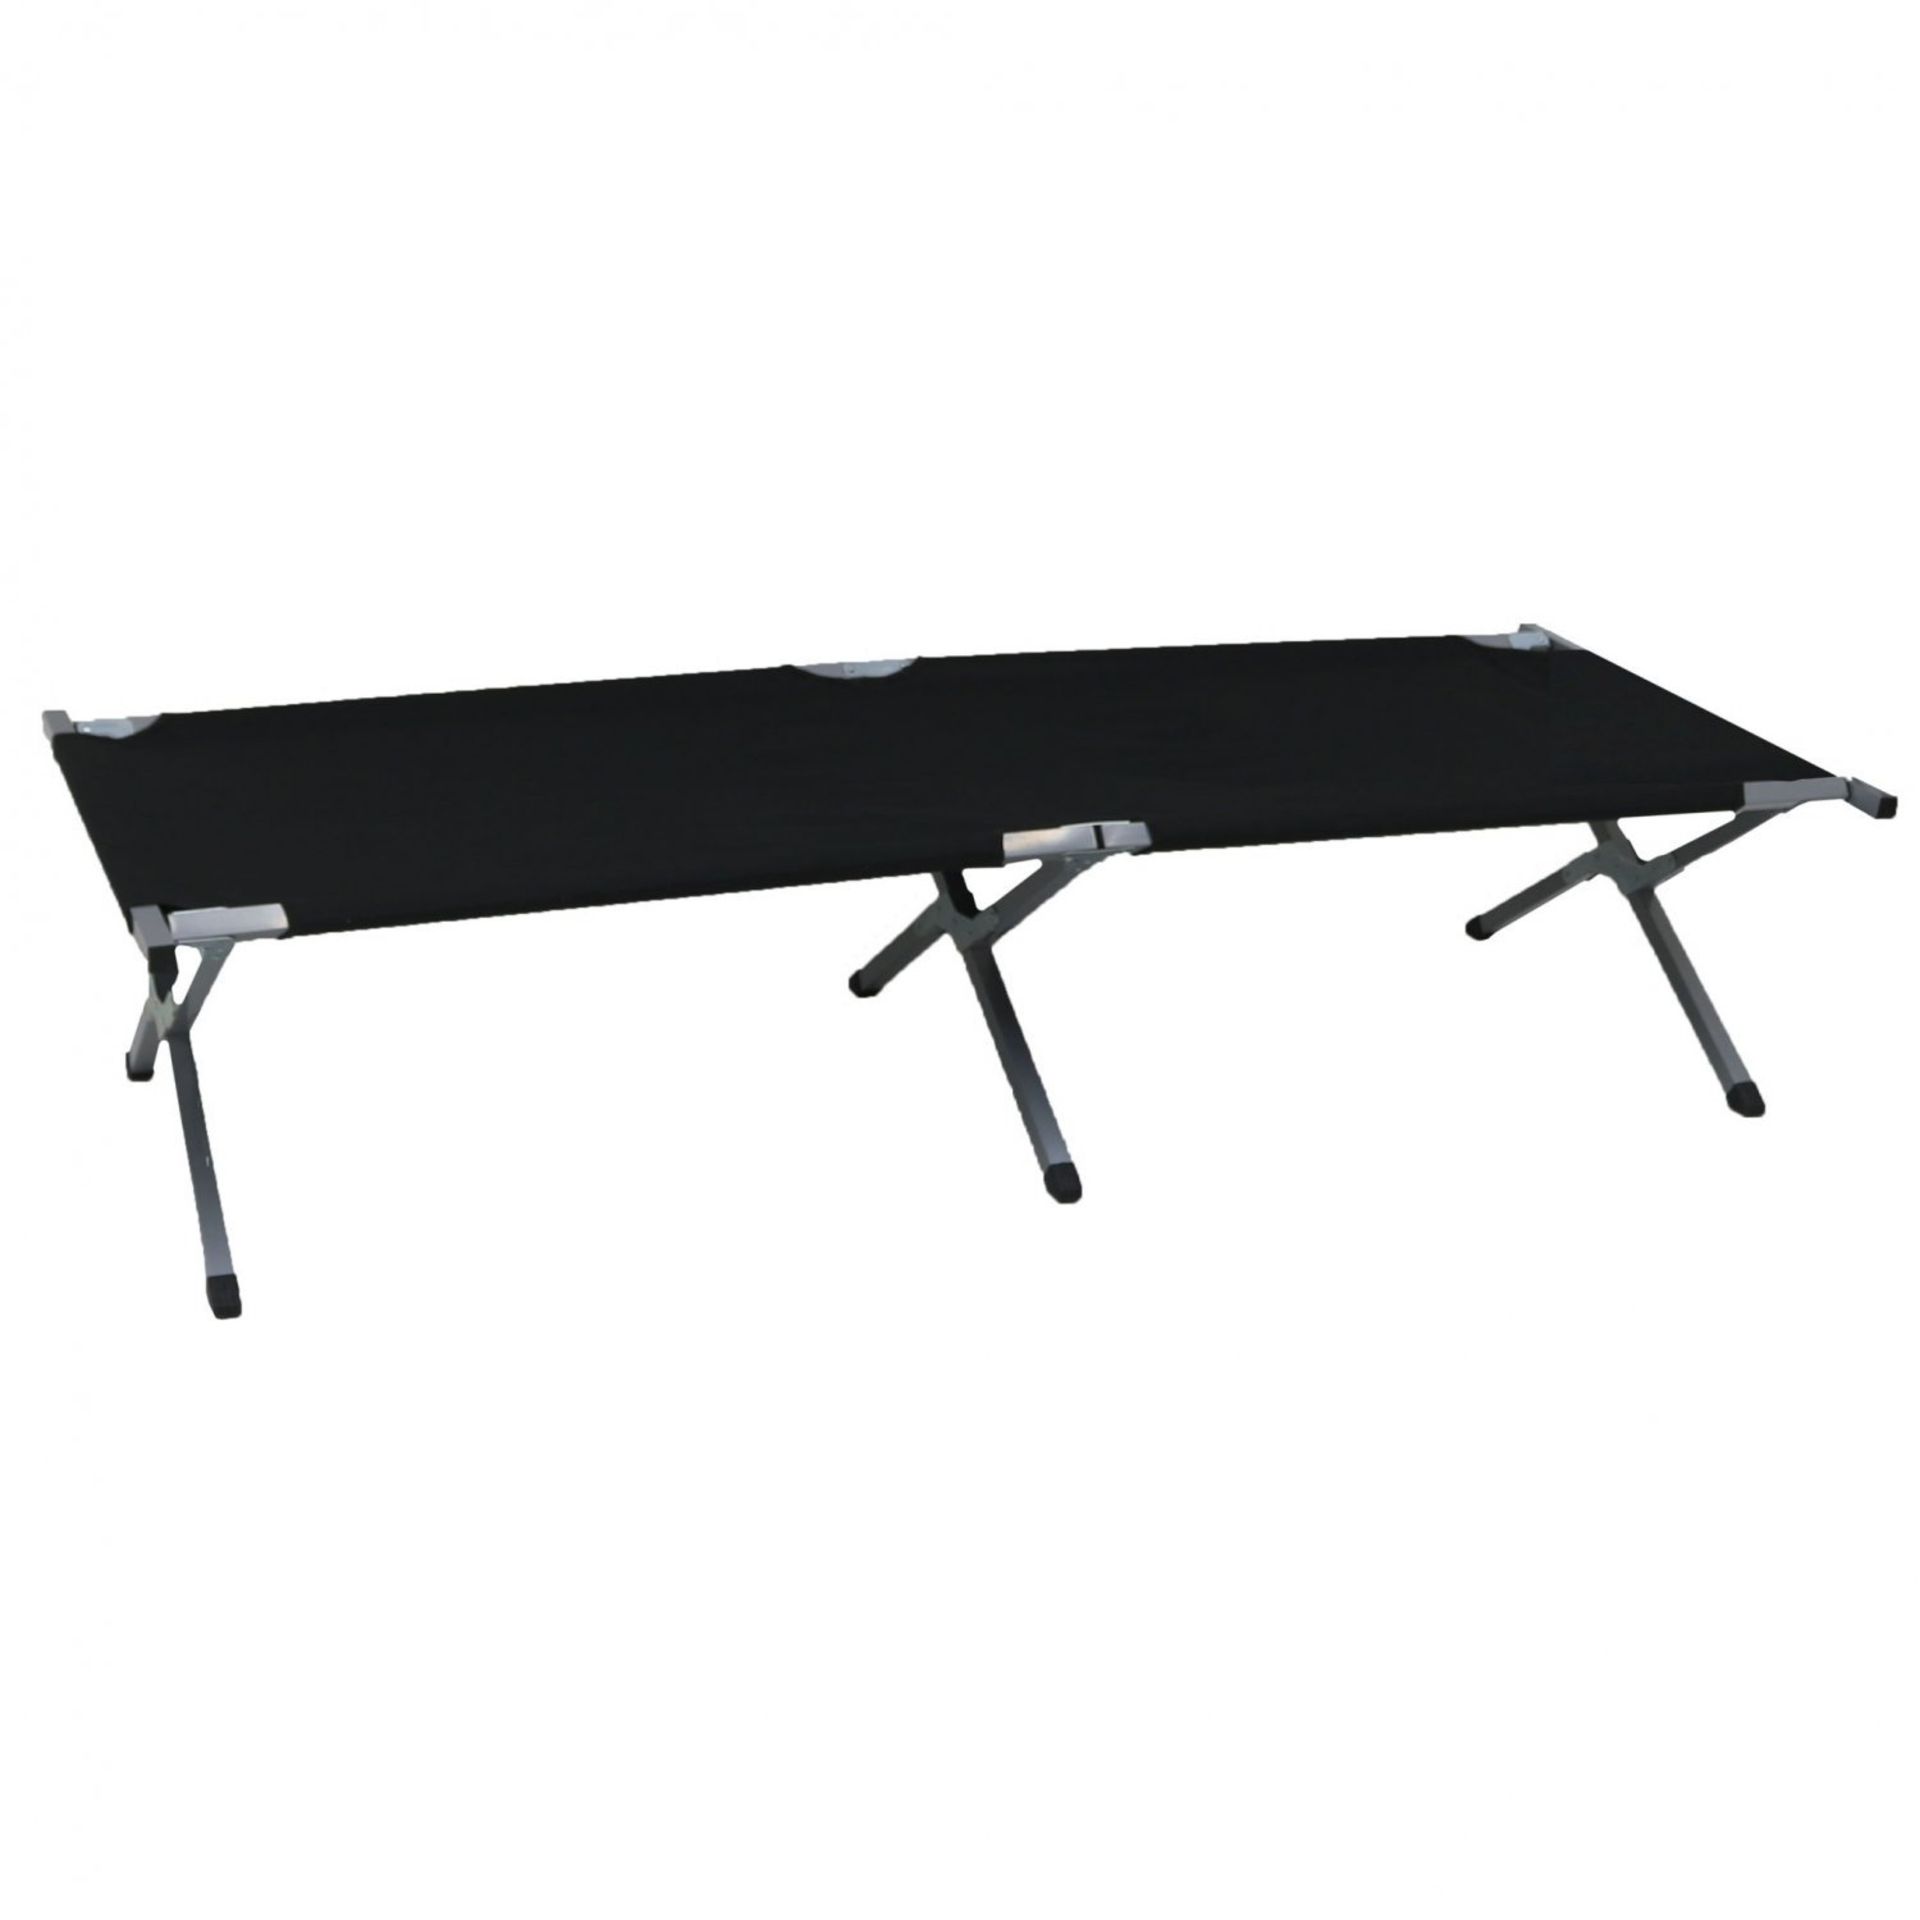 (G69) Heavy Duty Outdoor Folding Camping Bed Portable with Carry Bag Dimensions: 190 x 63 x 43...